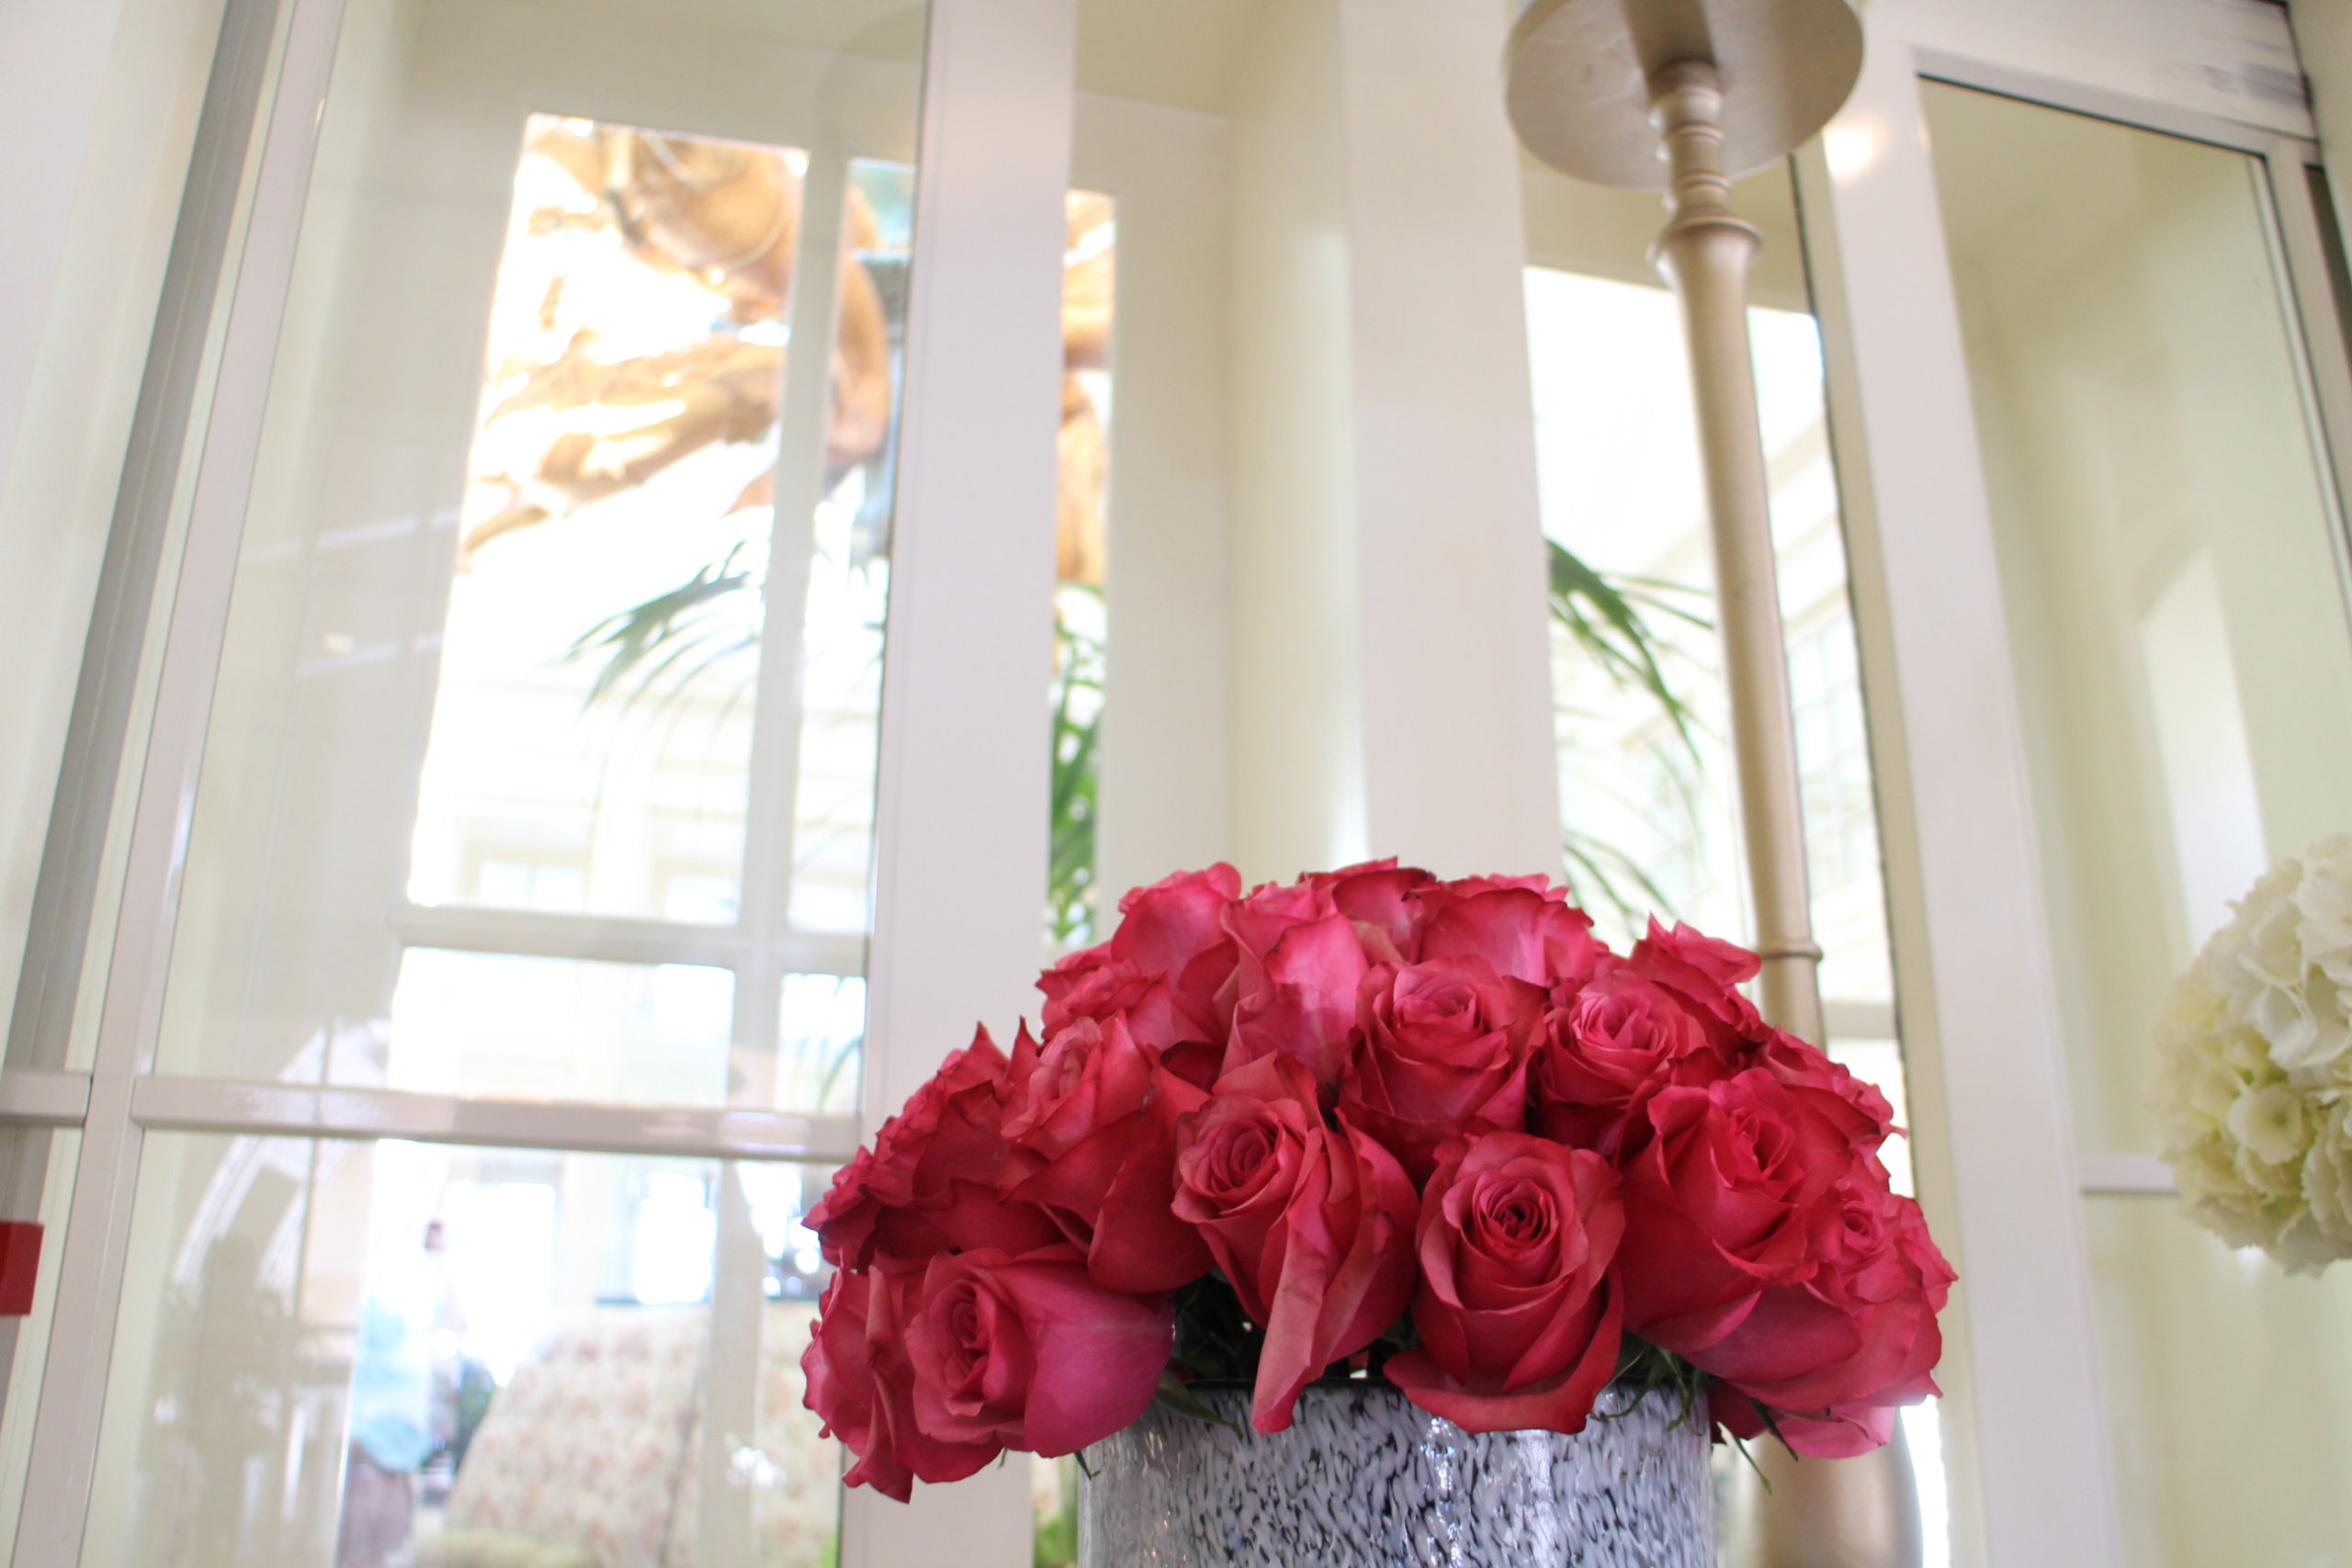 Fuschia roses in a vase in front of a crisp white entry way at Disney's BoardWalk Resort